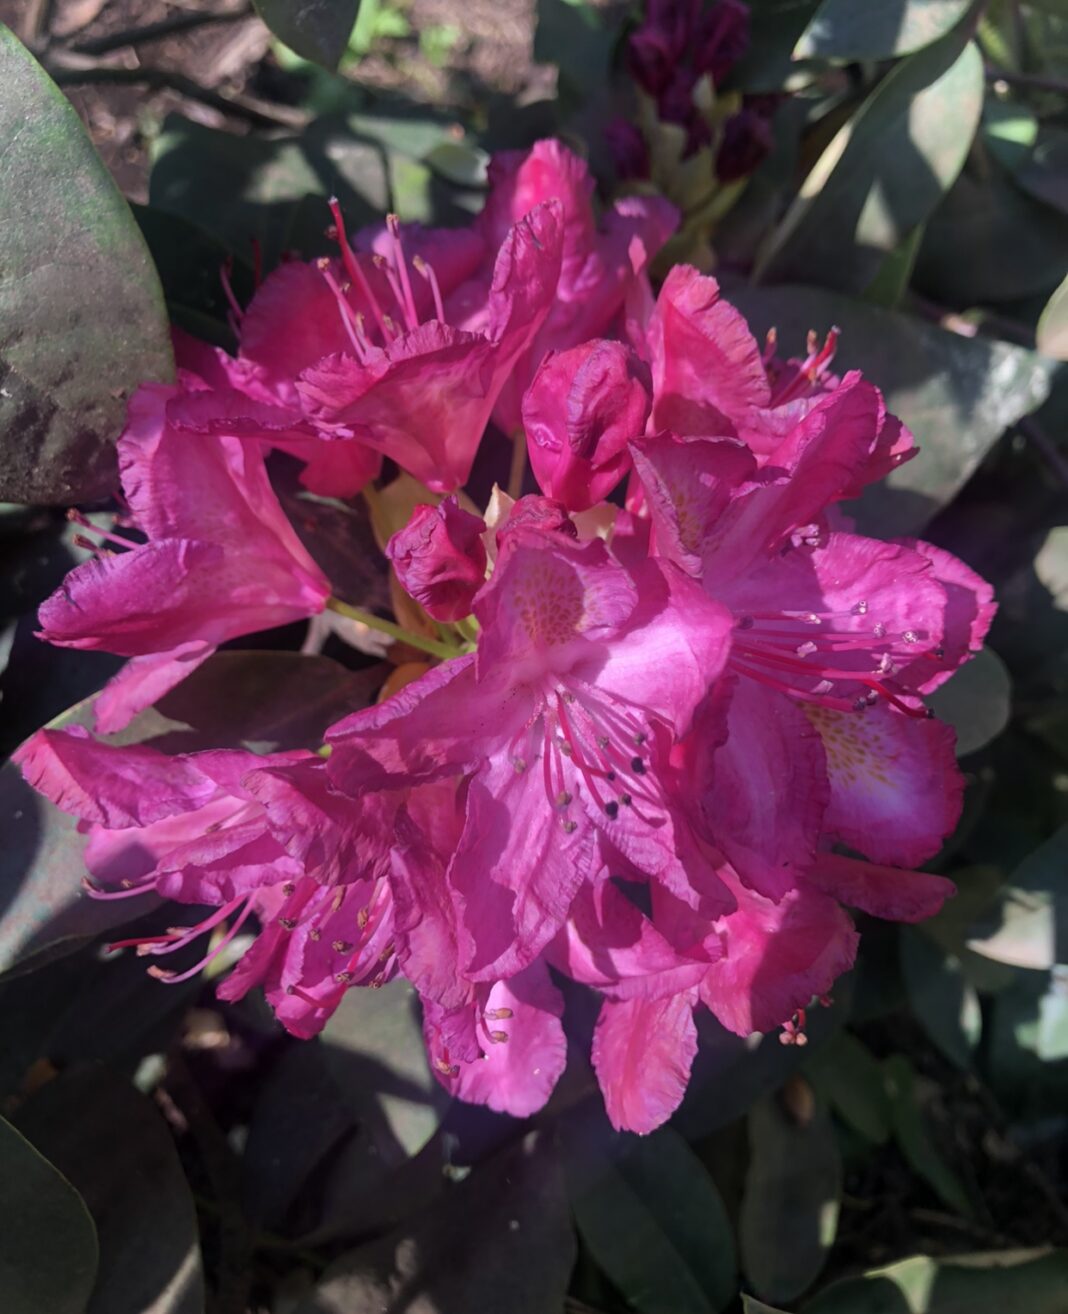 Exclusive variety of rhododendron "Dimash Qudaibergen" obtained in Latvia